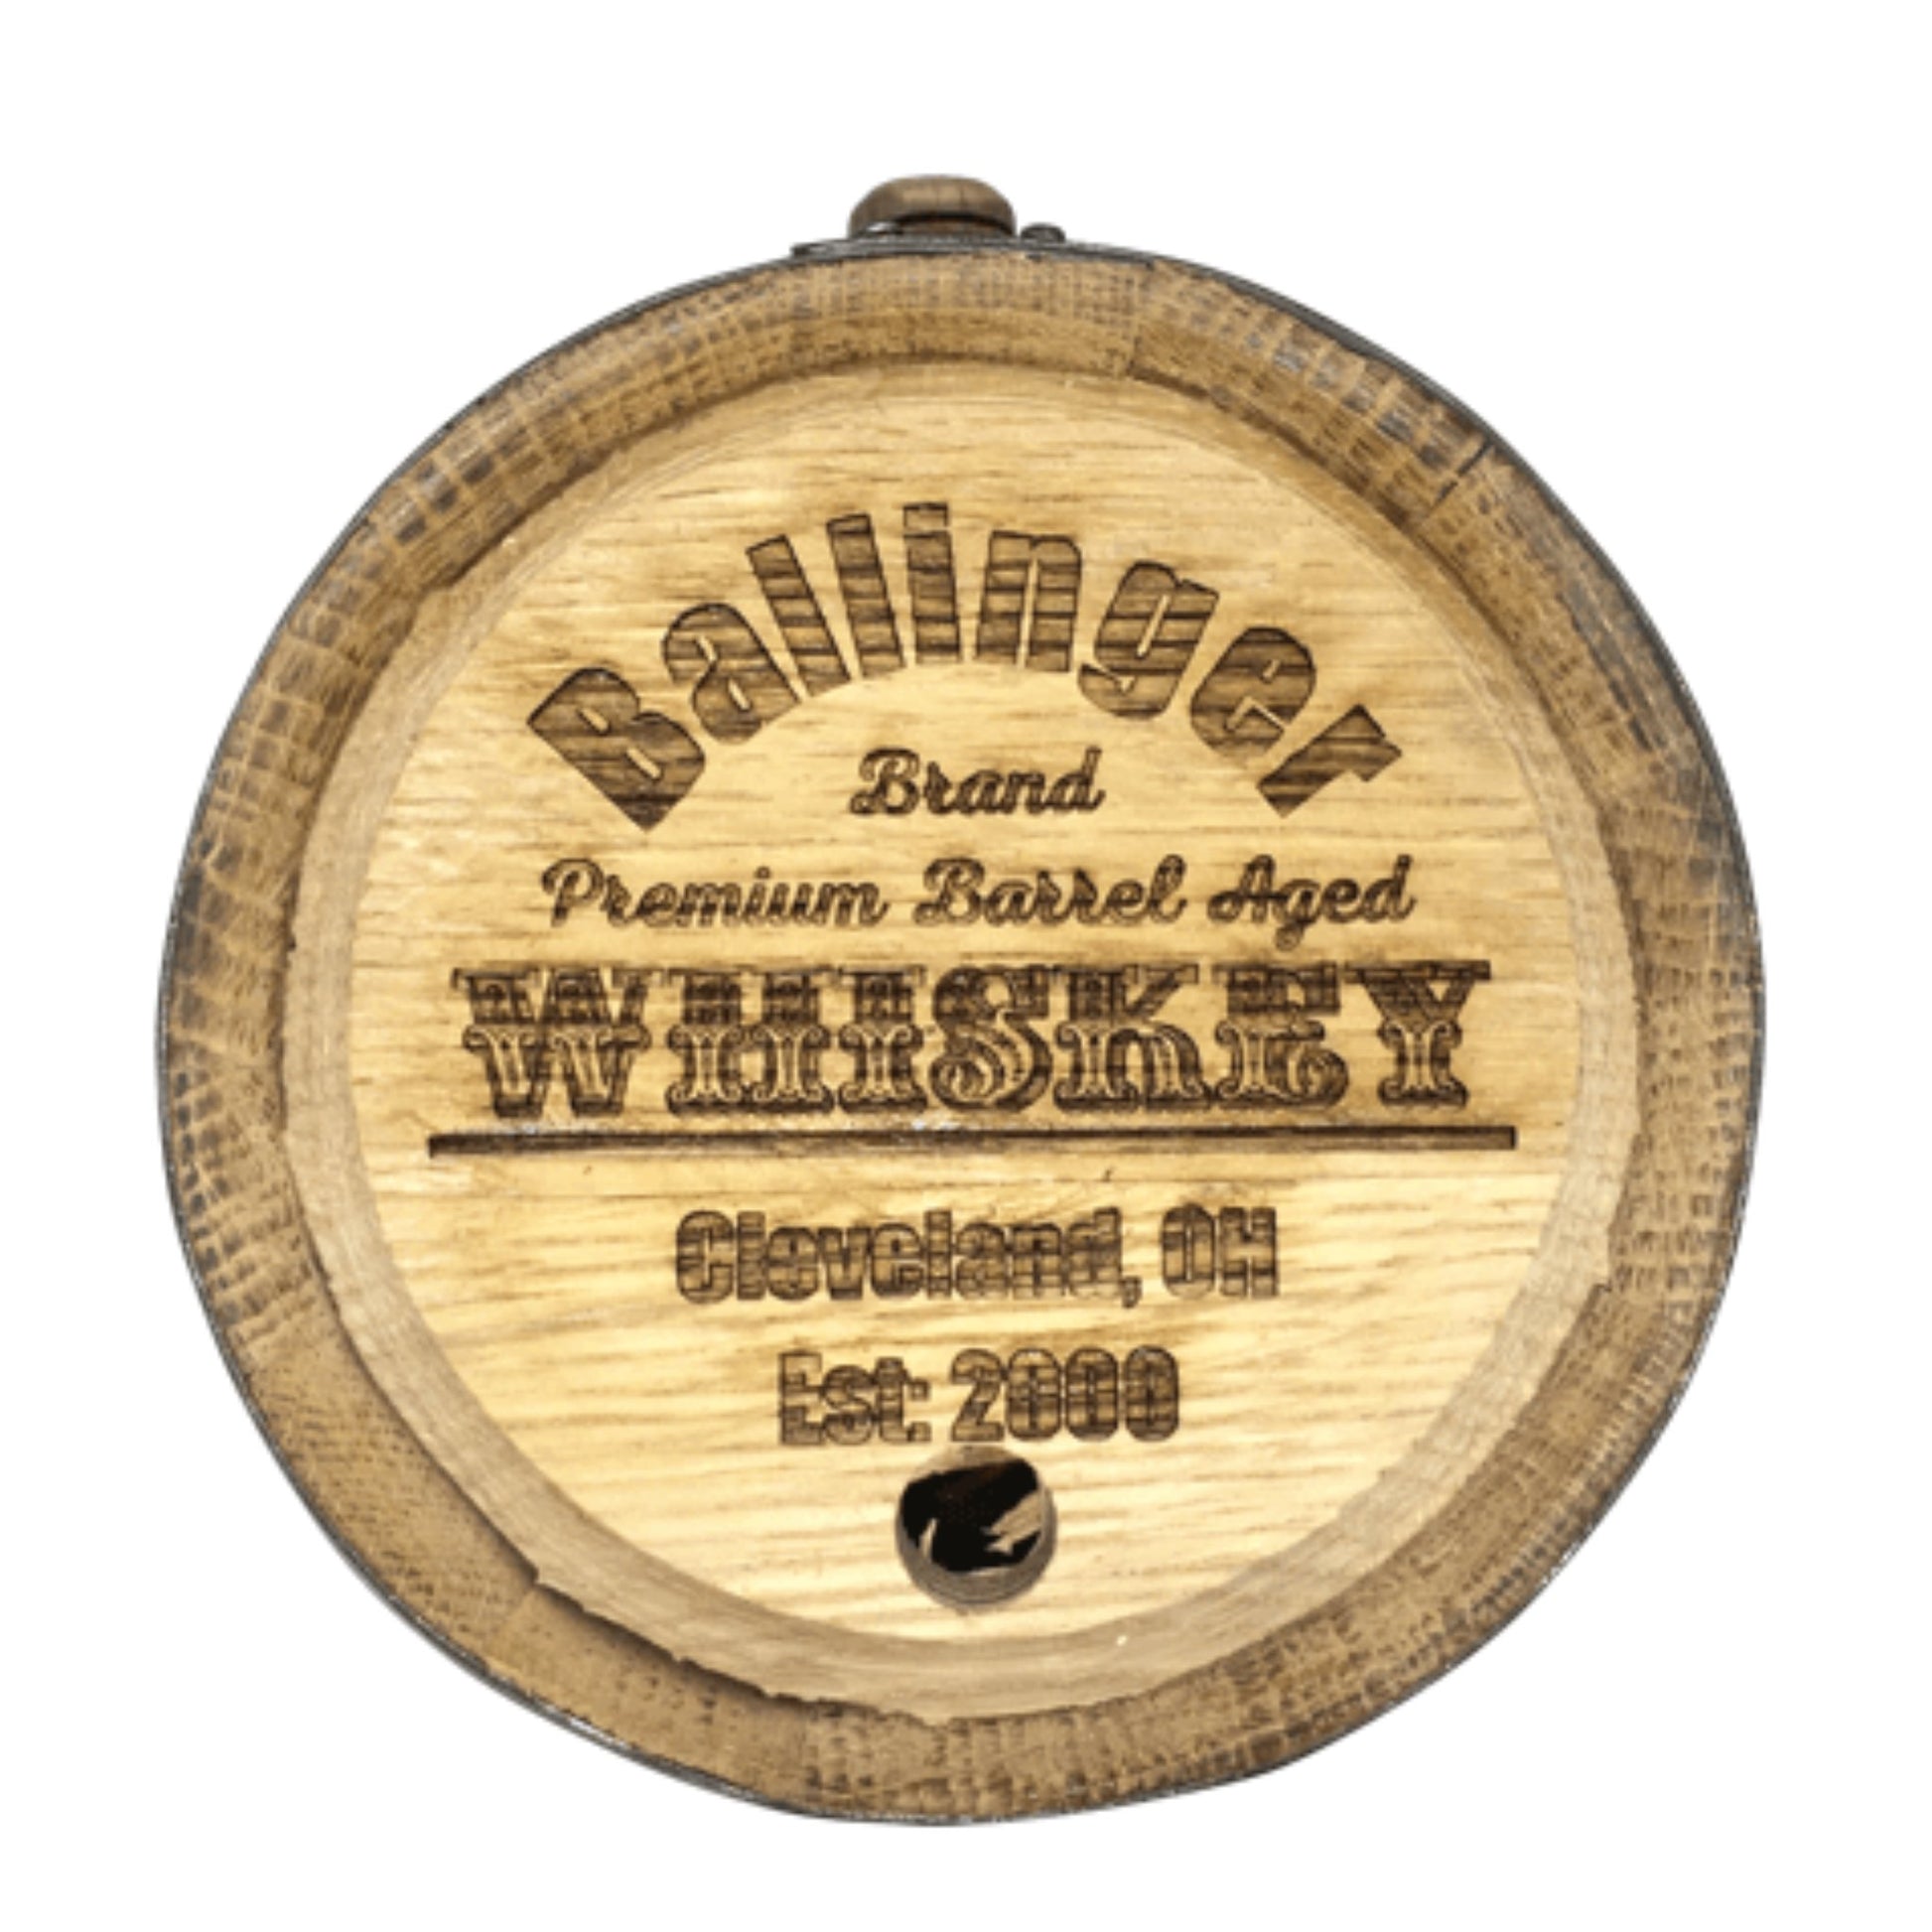 Personalized Whiskey Barrel Crate - Gift Crates